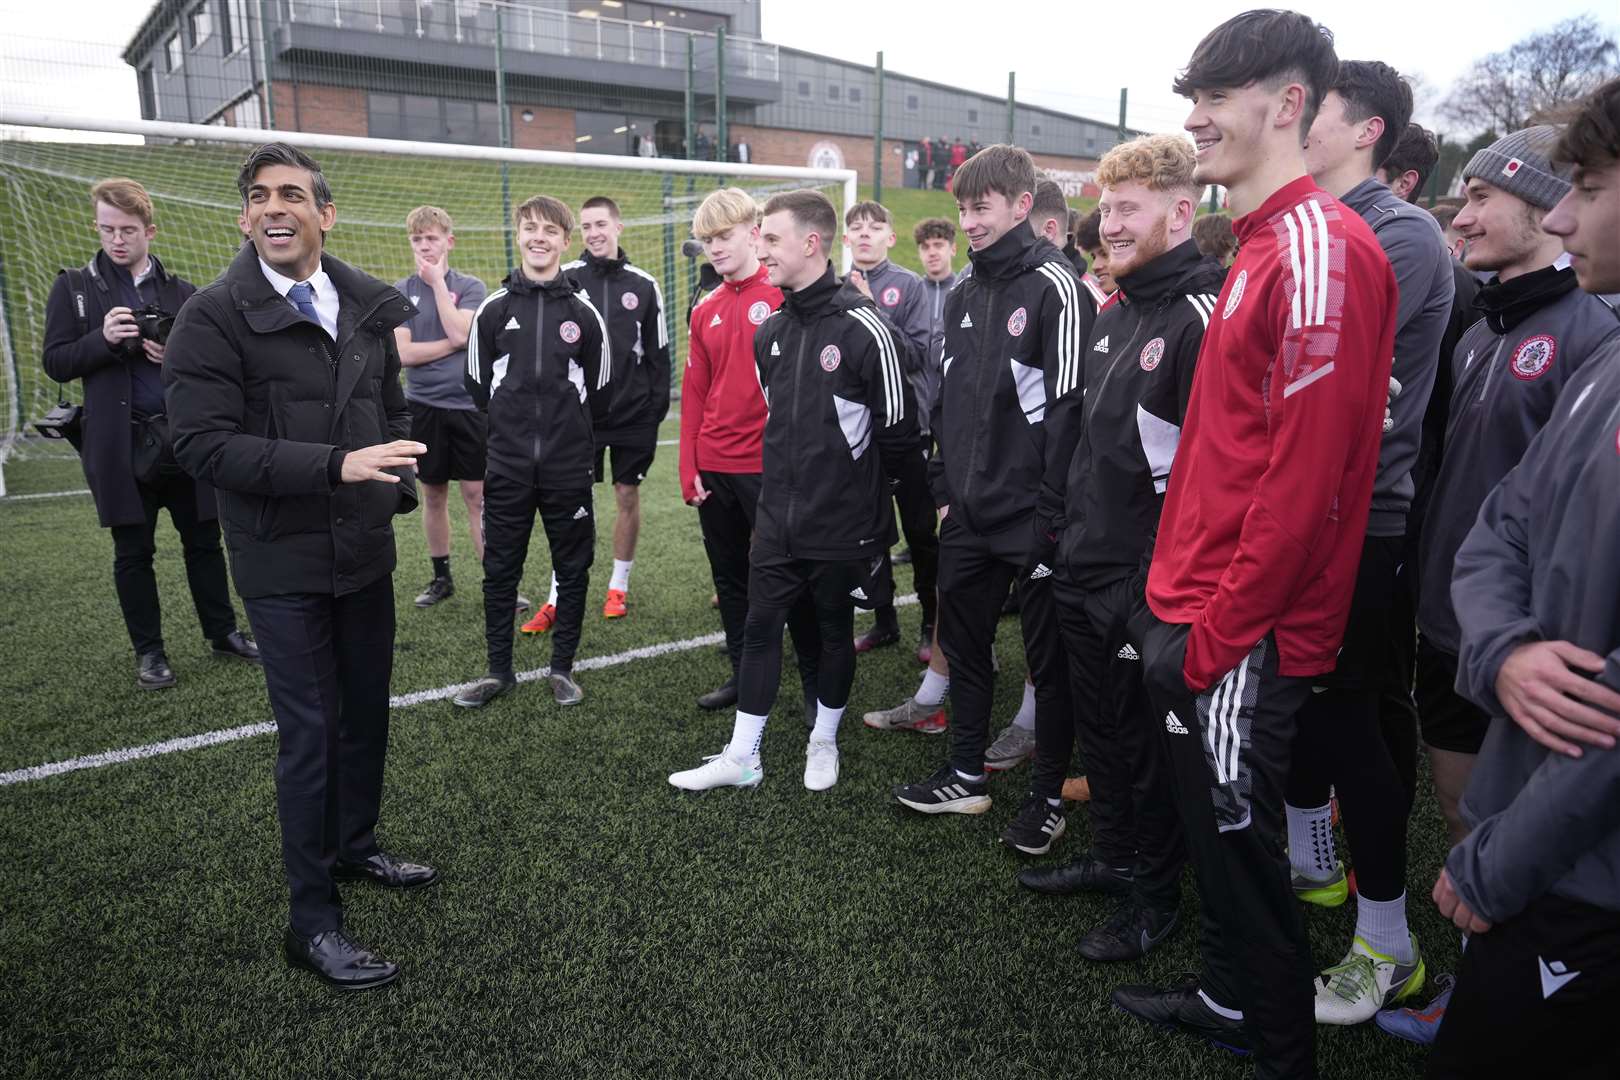 Prime Minister Rishi Sunak speaks to young football players during a visit to Accrington Stanley Community Trust in Lancashire (Christopher Furlong/PA)